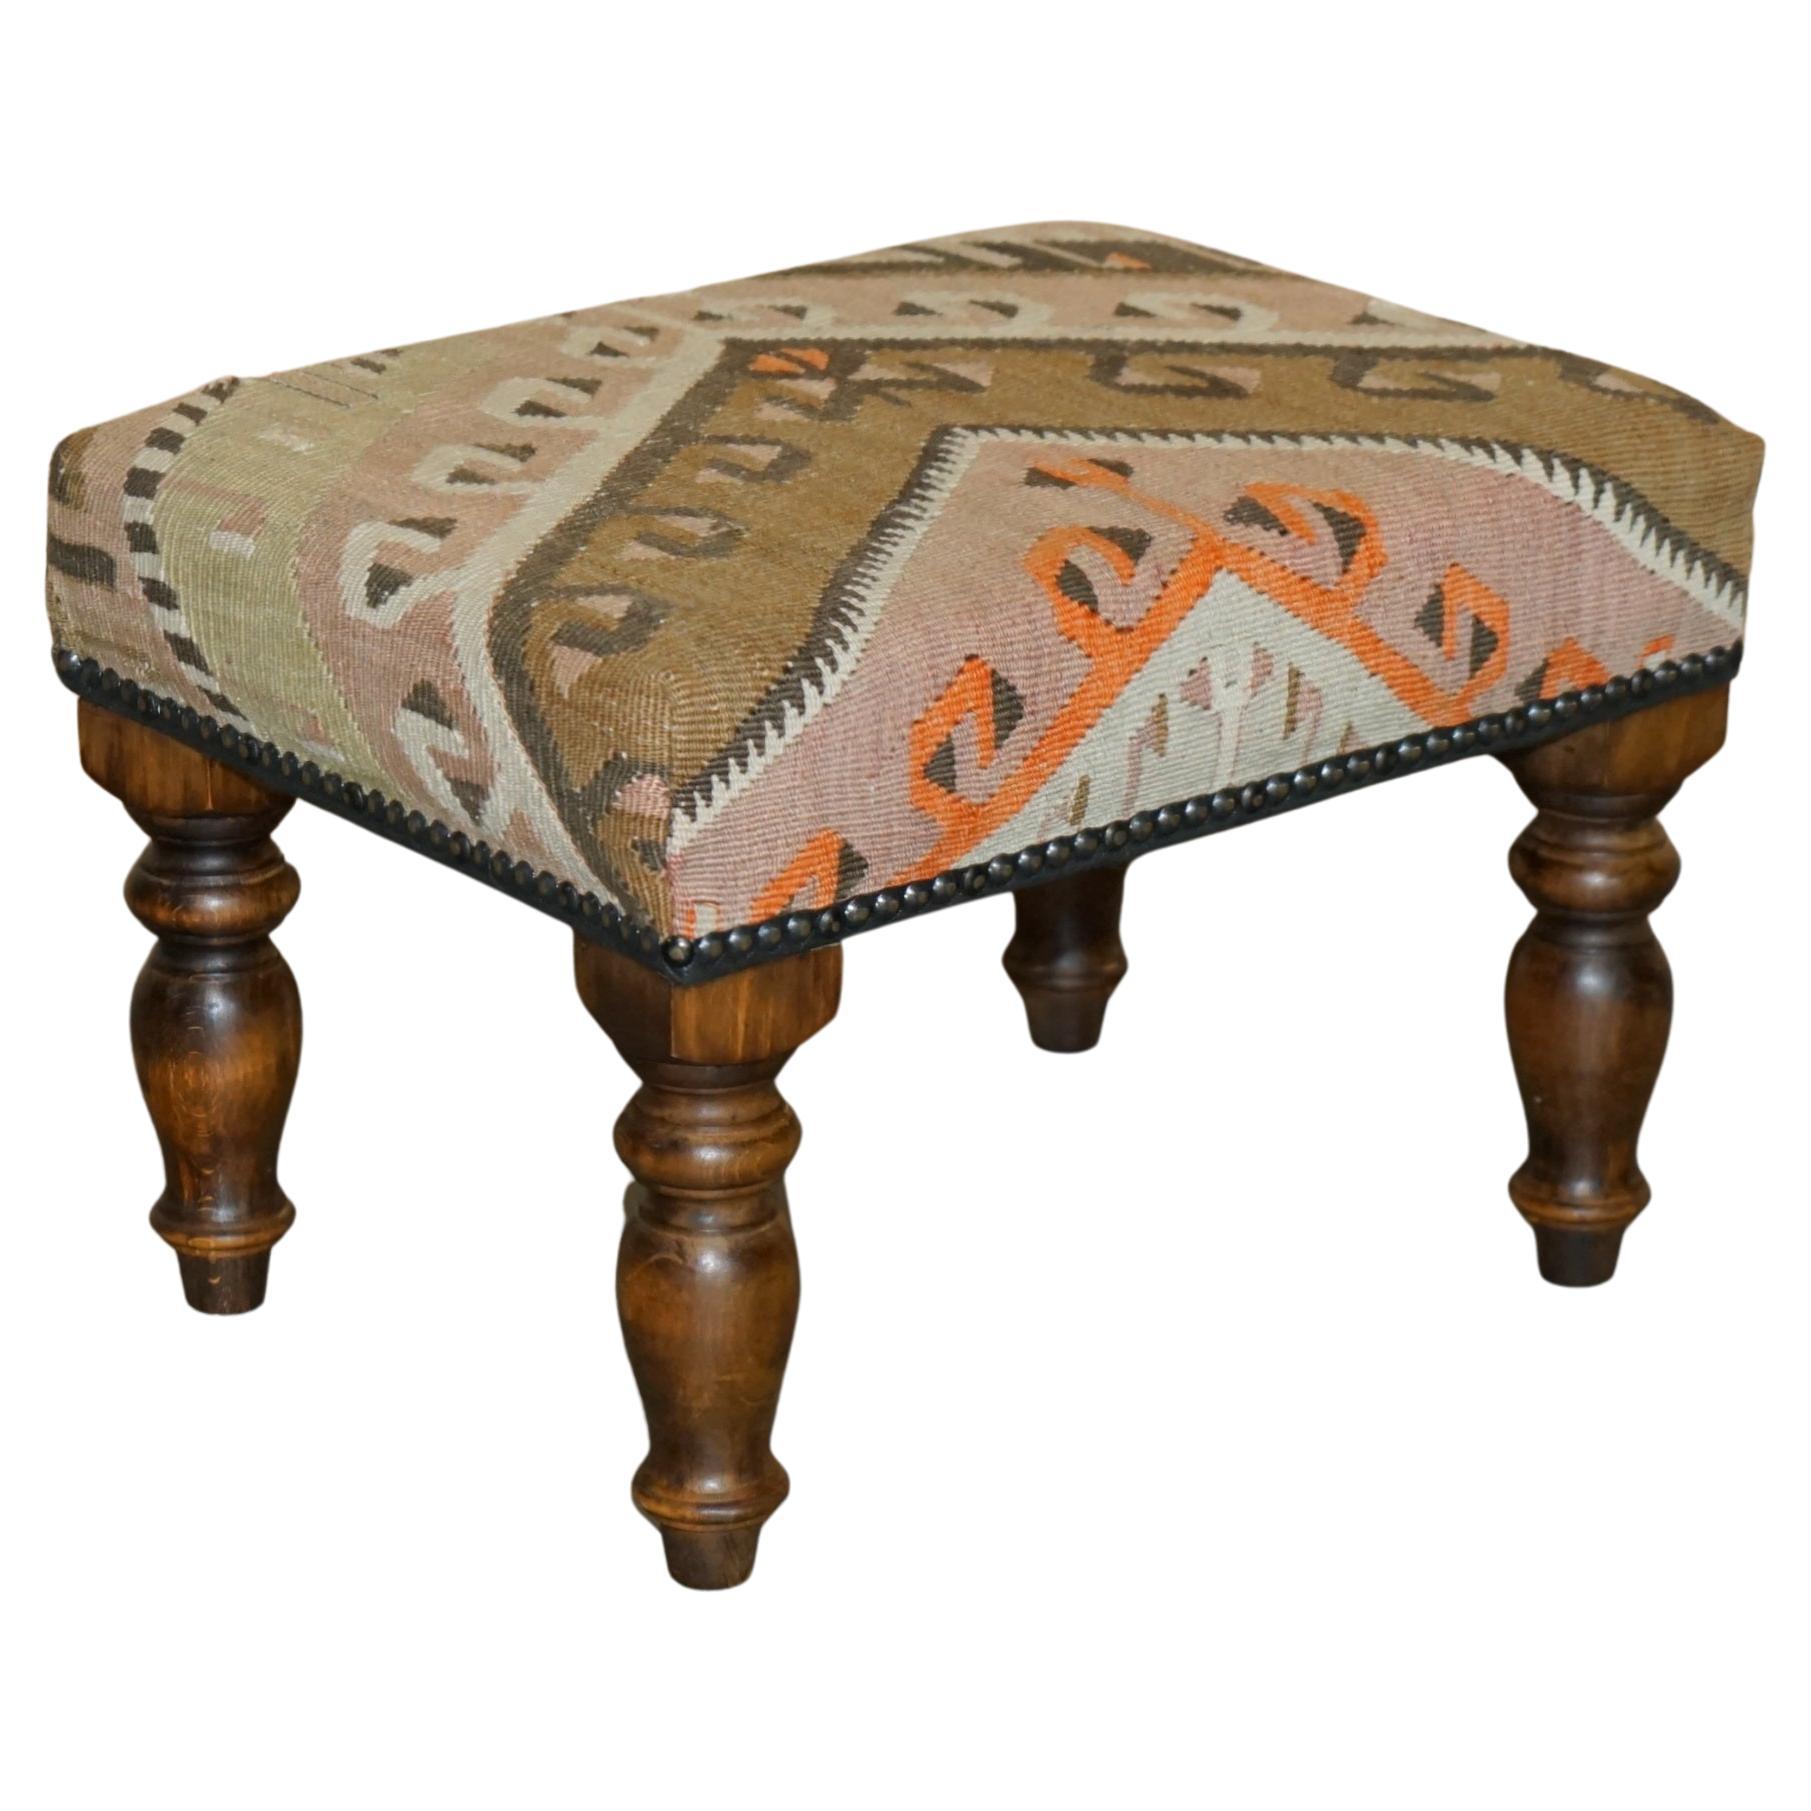 STUNNiNG & COLLECTABLE VINTAGE GEORGE SMITH CHELSEA KILIM FOOTSTOOL OTTOMAN For Sale